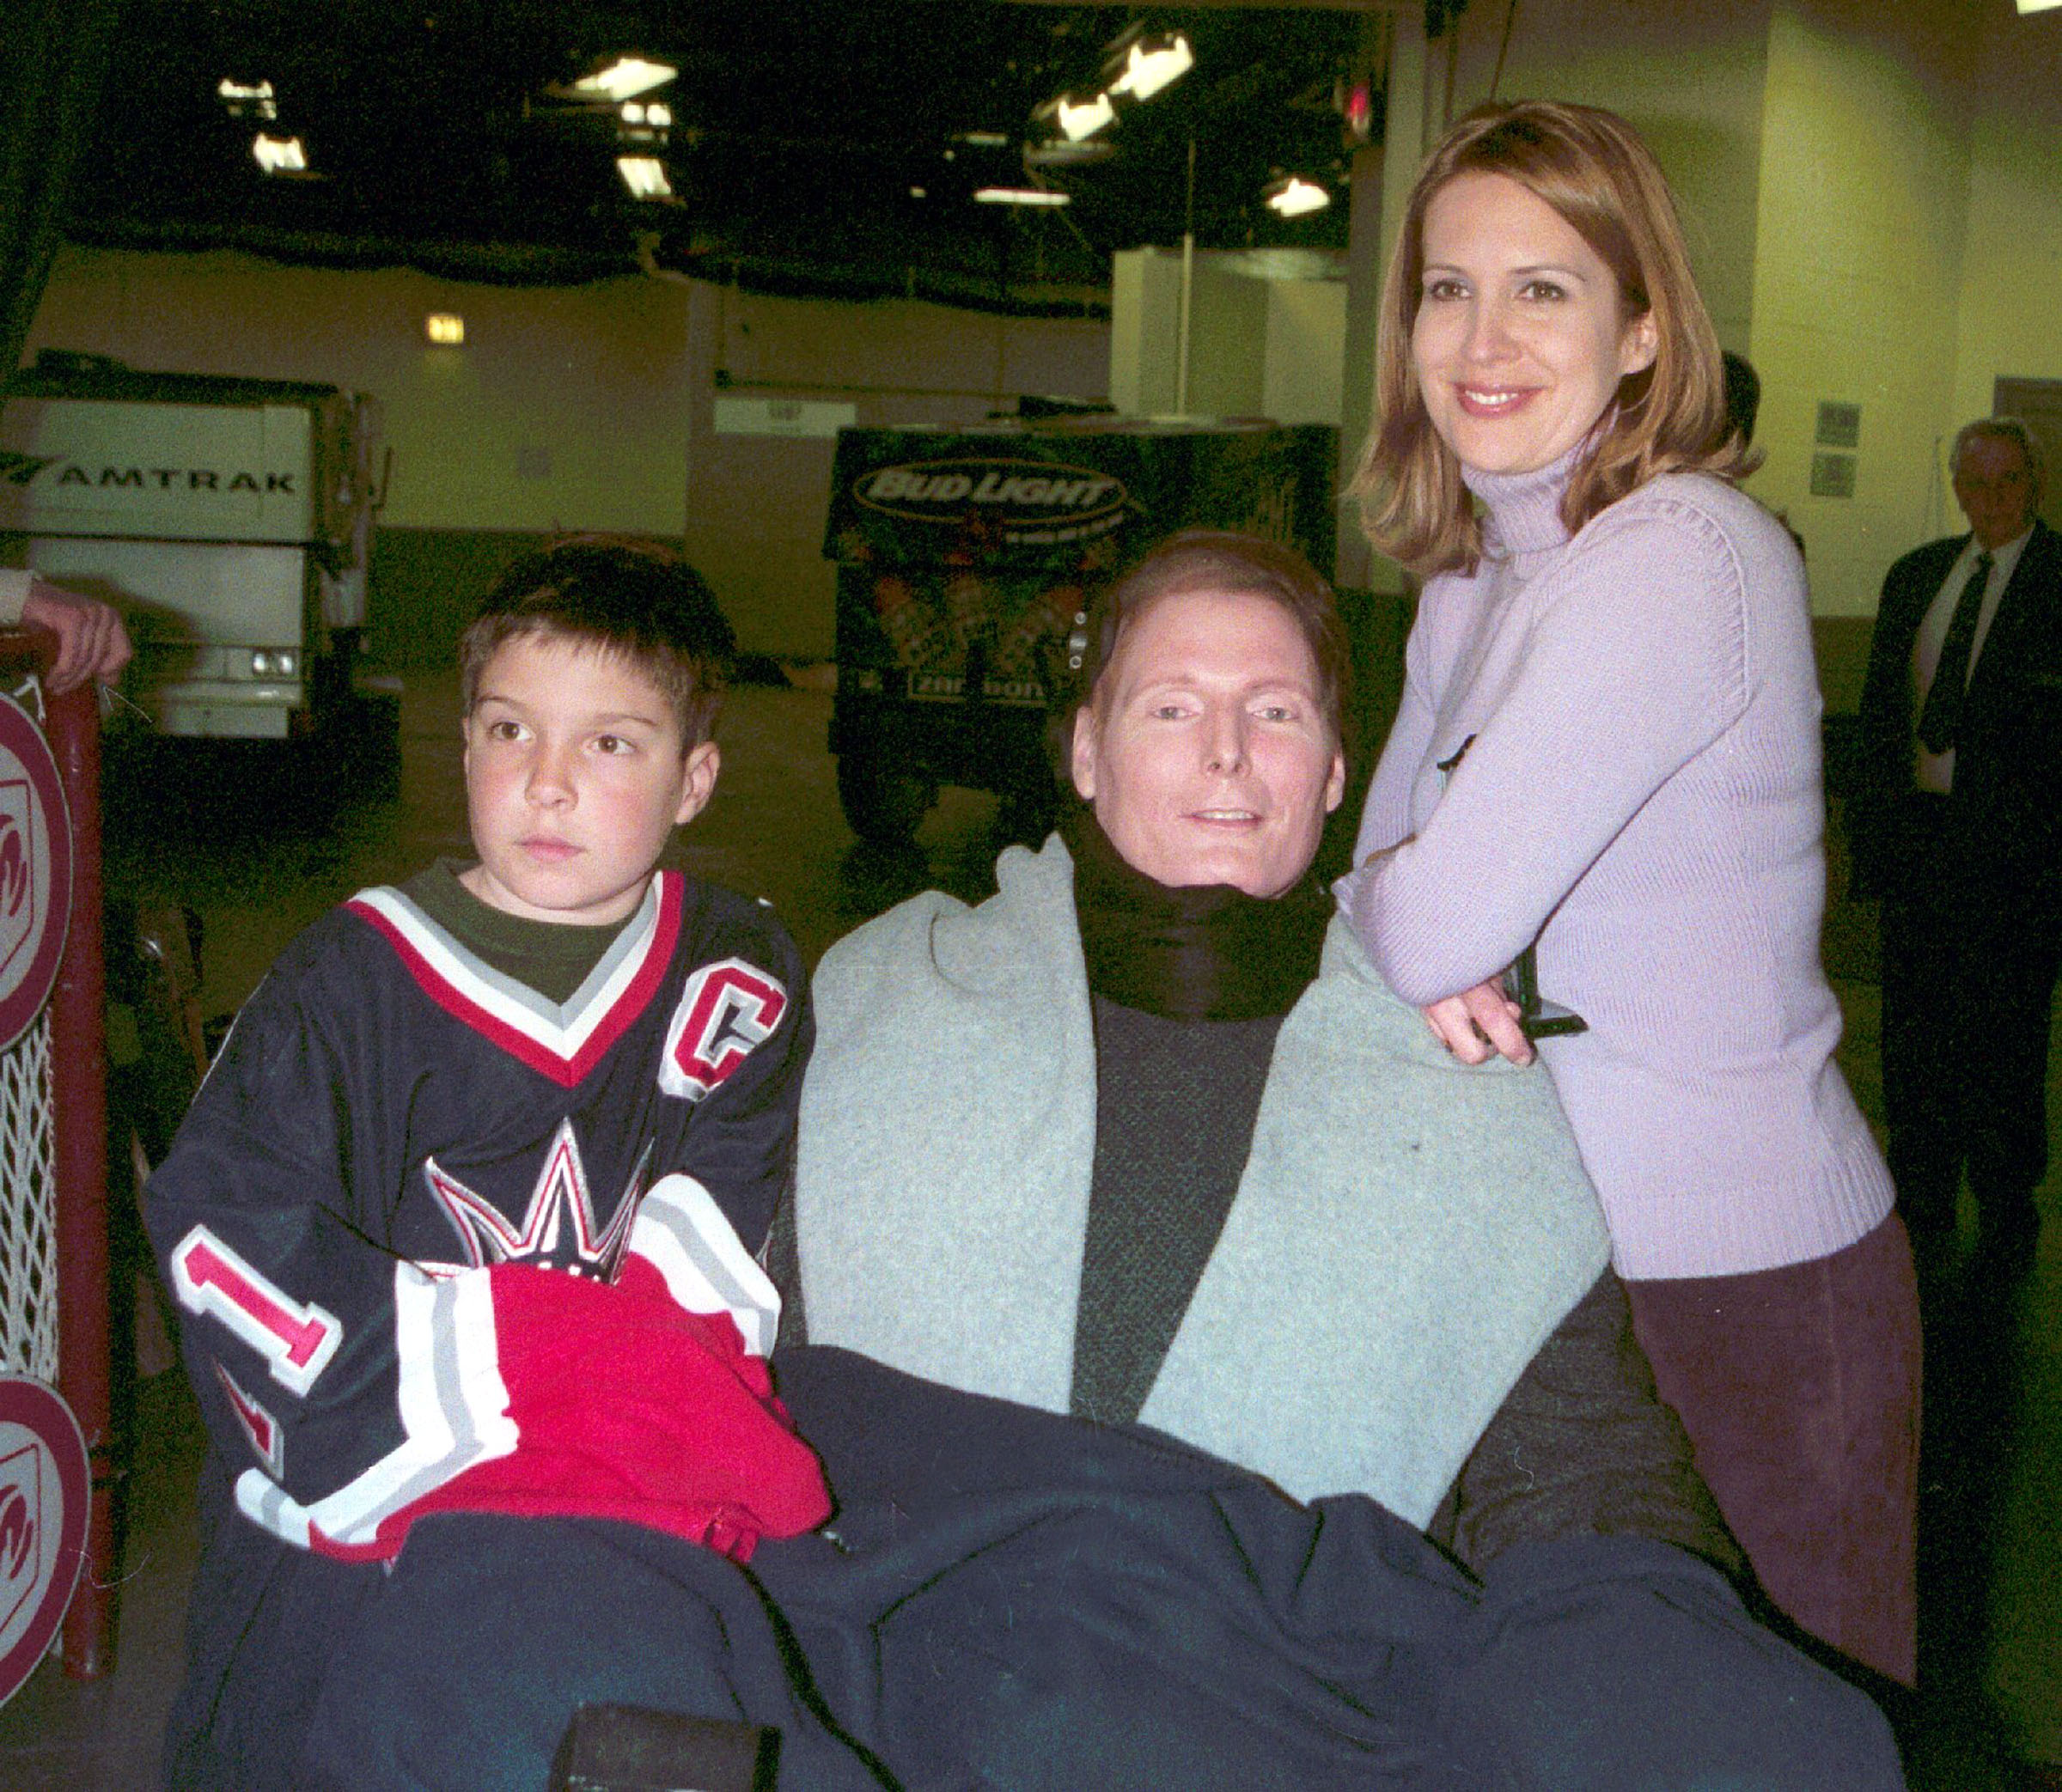 Donna Reeve, her husband Christopher Reeve and their son Will attend "SuperSkate 2001" on January 7, 2001 at Madison Square Garden in New York City | Source: Getty Images